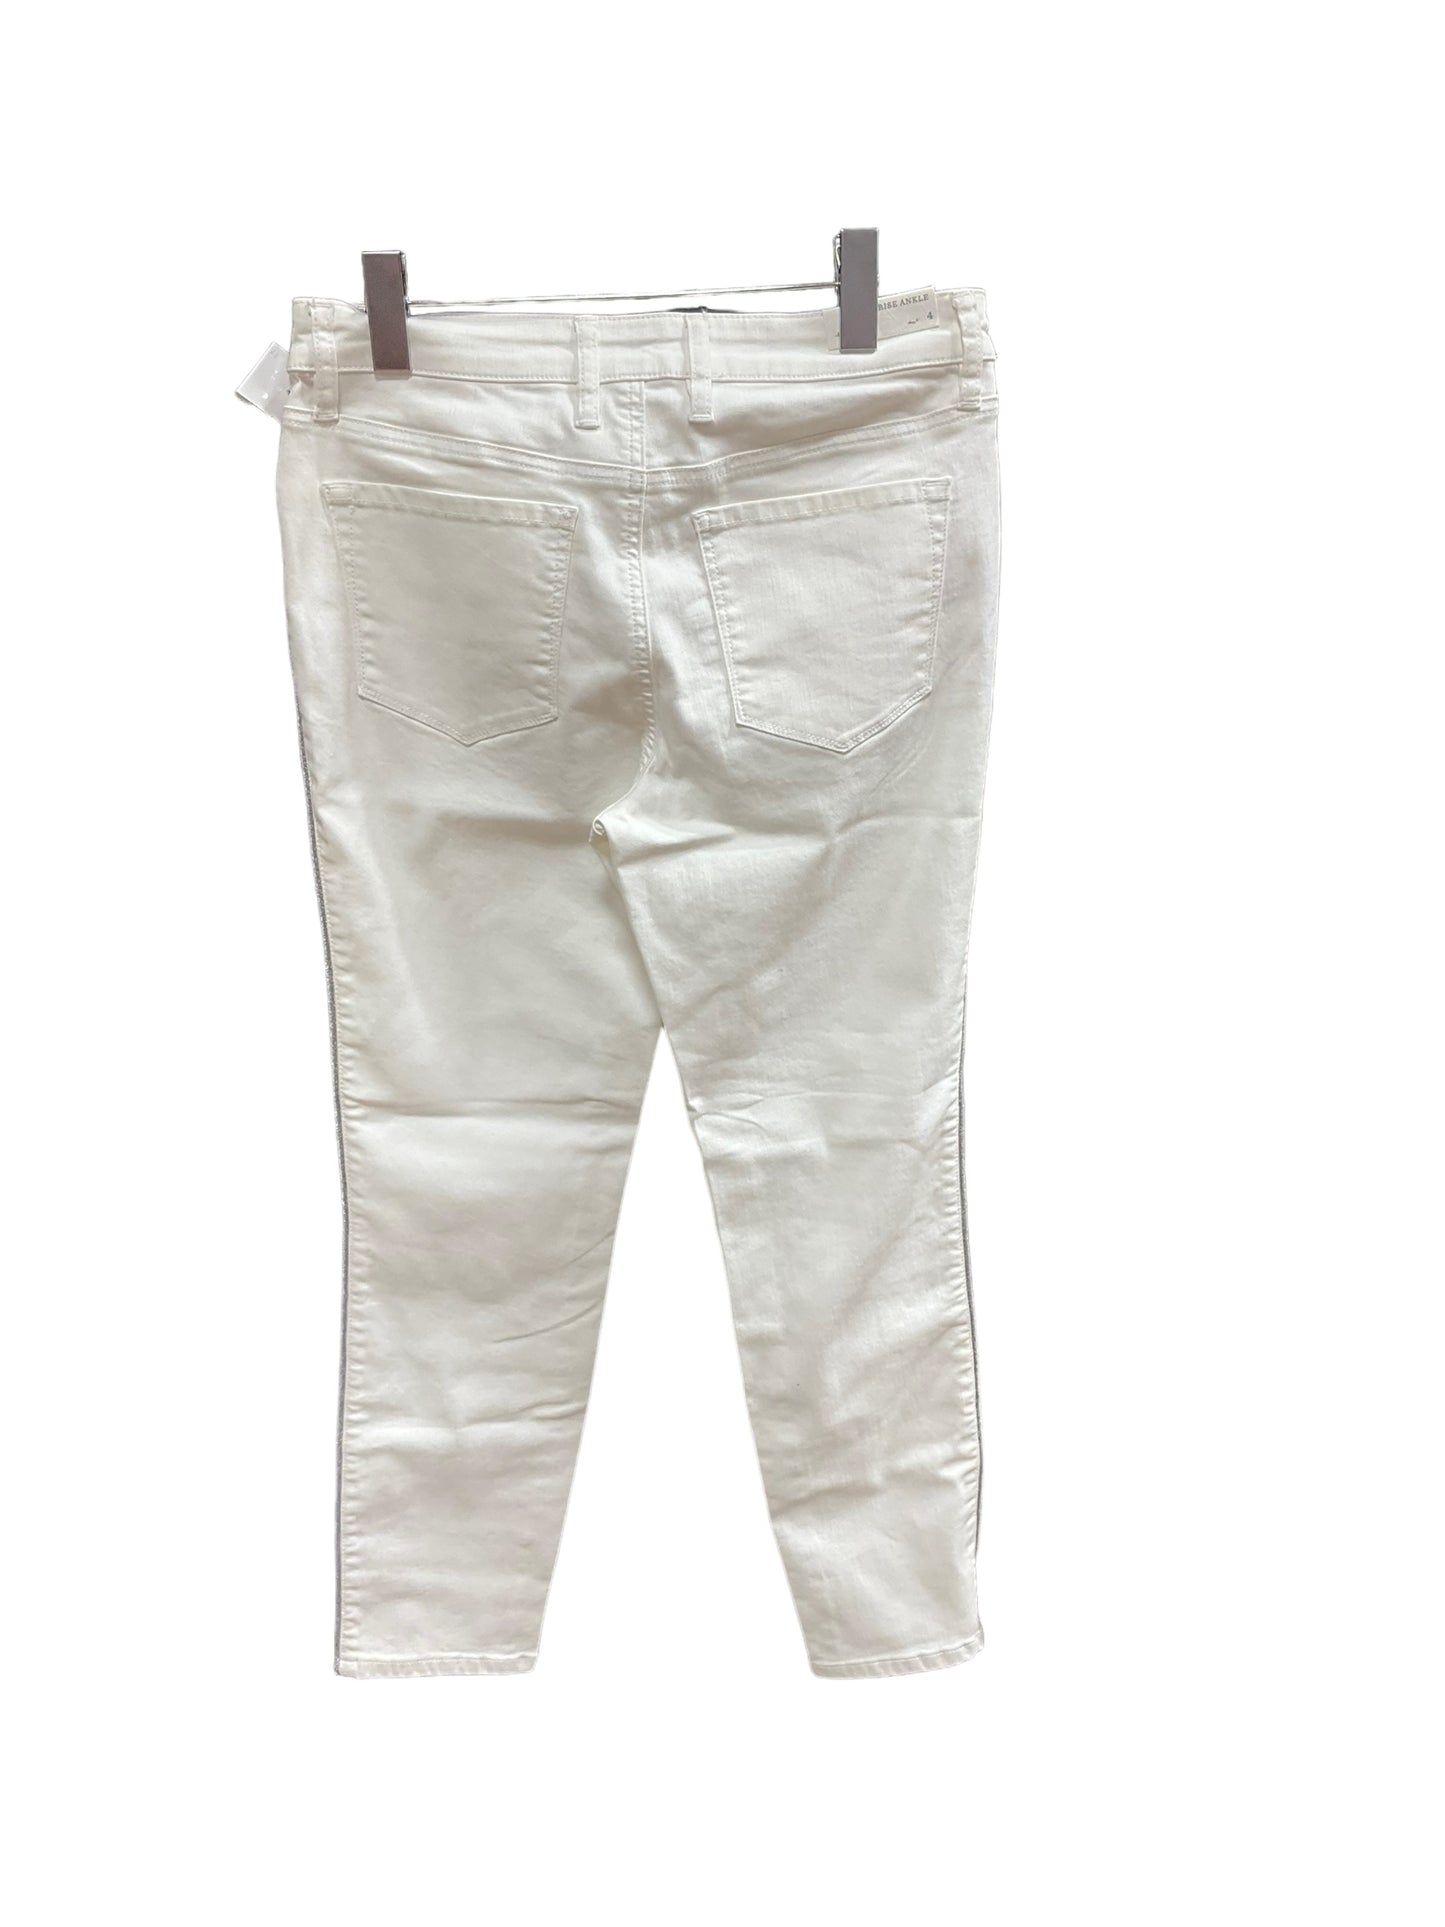 Jeans Skinny By Tommy Bahama  Size: 4